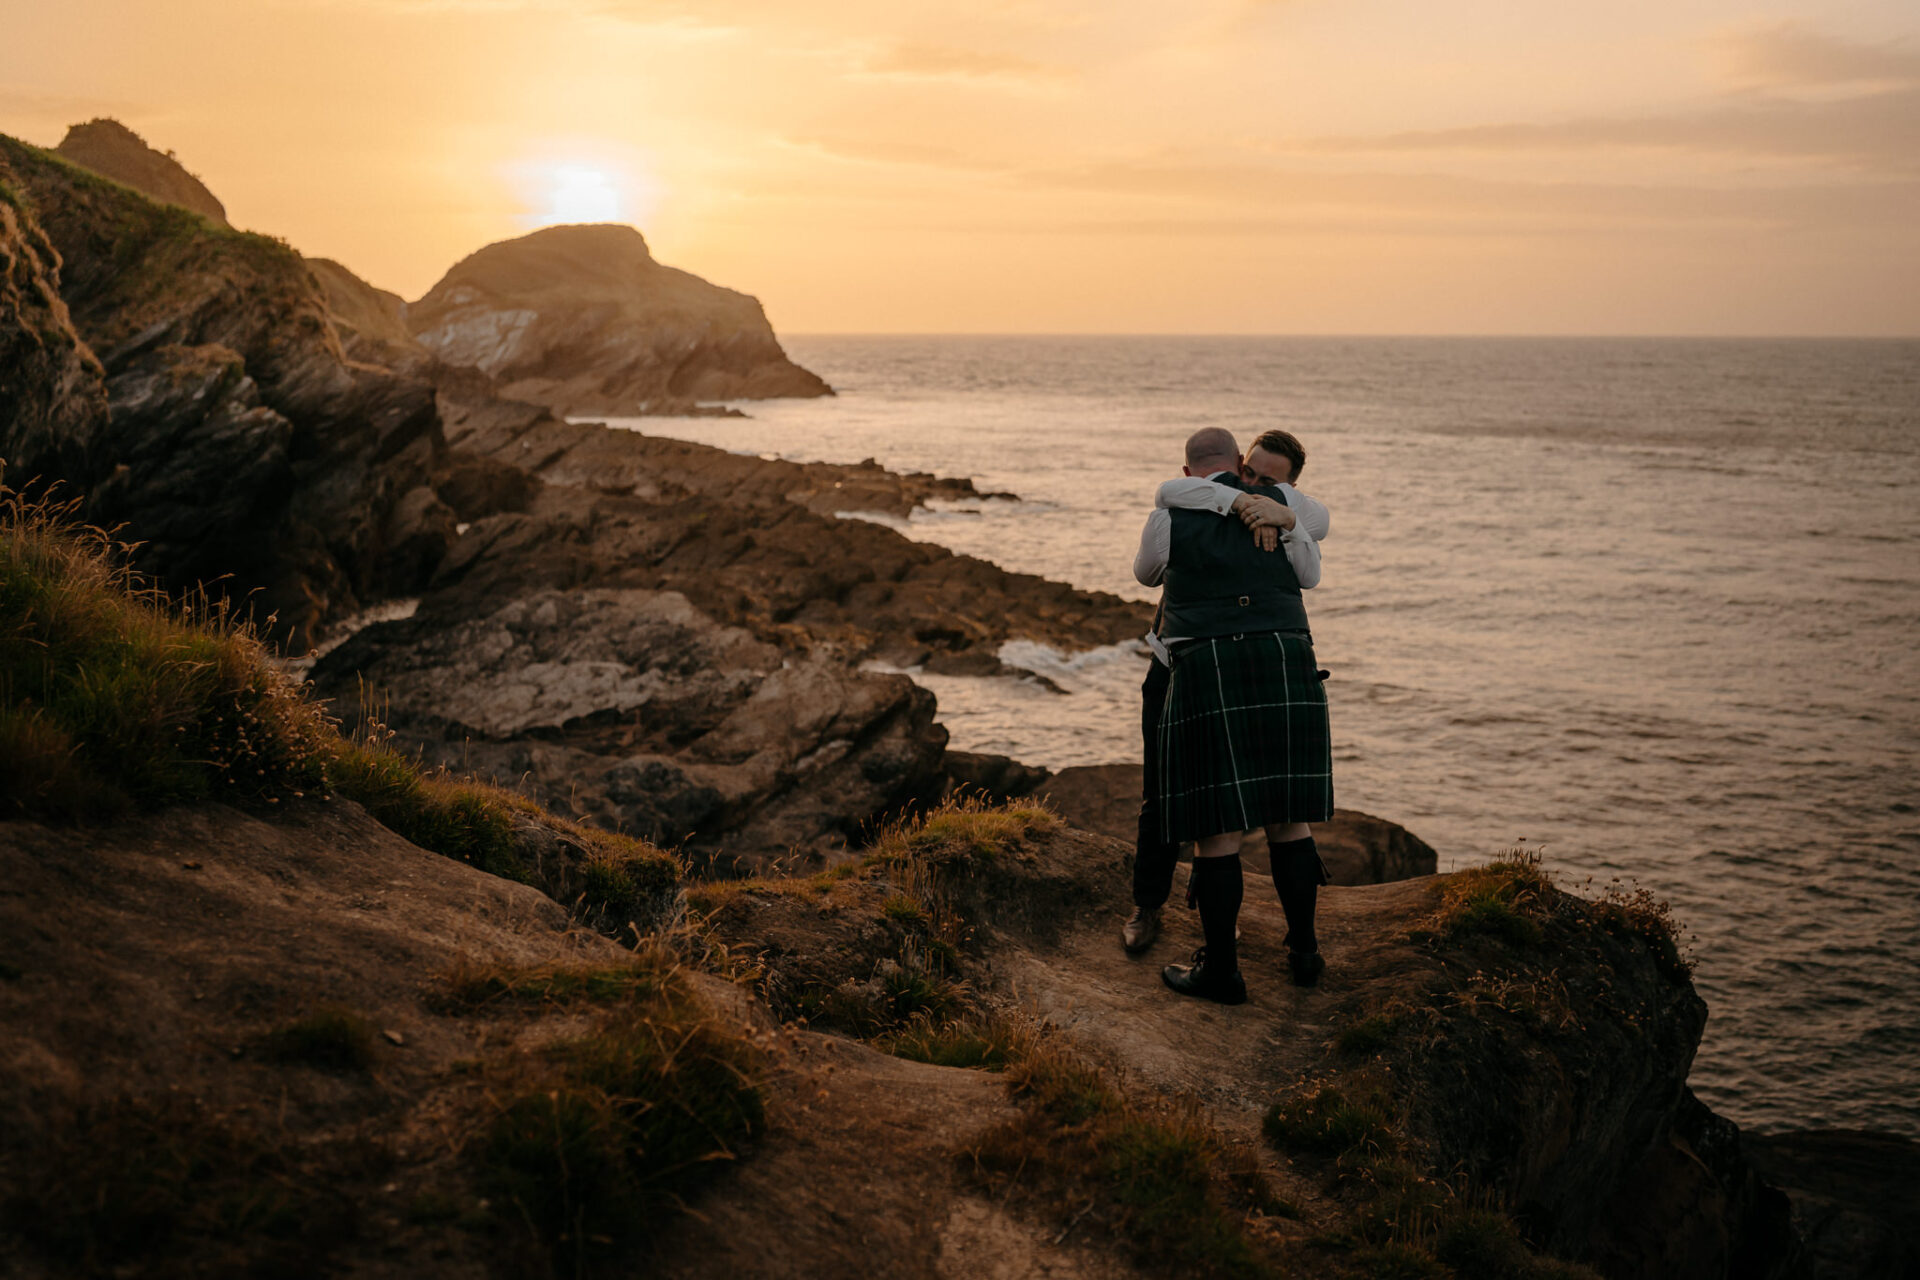 A couple's recent wedding ceremony on a cliff overlooking the ocean at sunset.